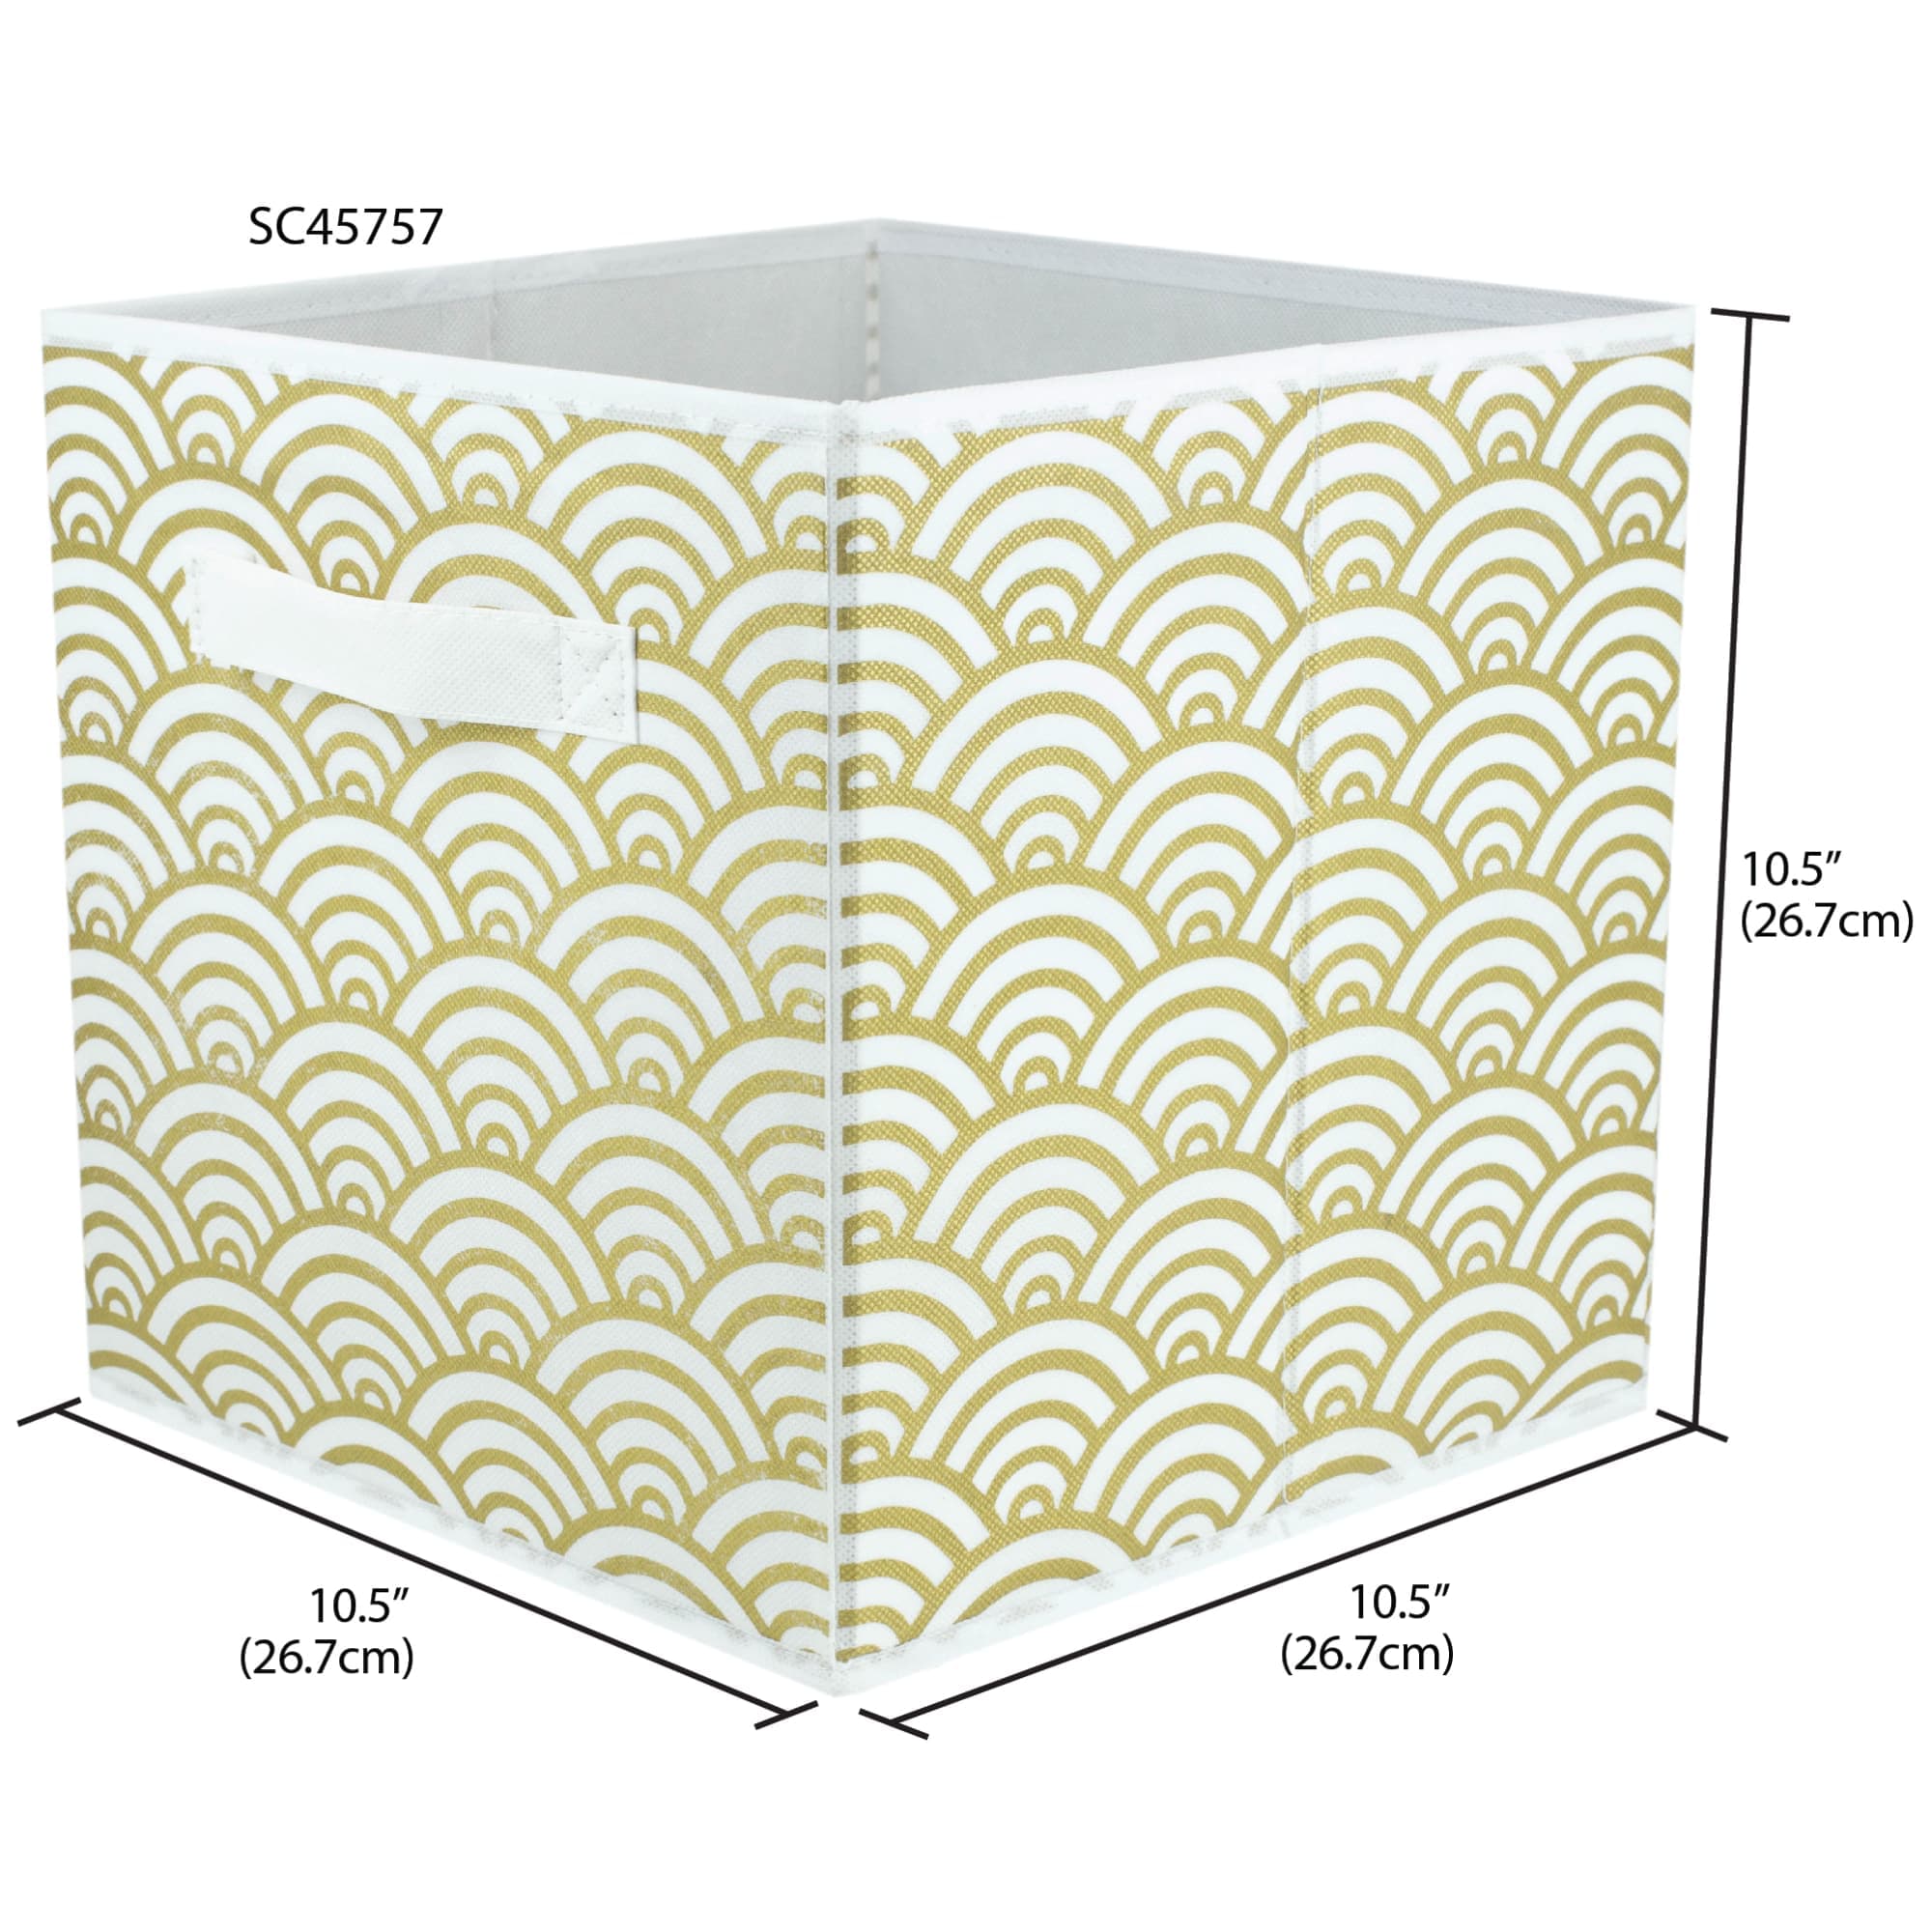 Home Basics Metallic Scallop Collapsible Non-Woven Storage Cube, Gold $3.00 EACH, CASE PACK OF 12